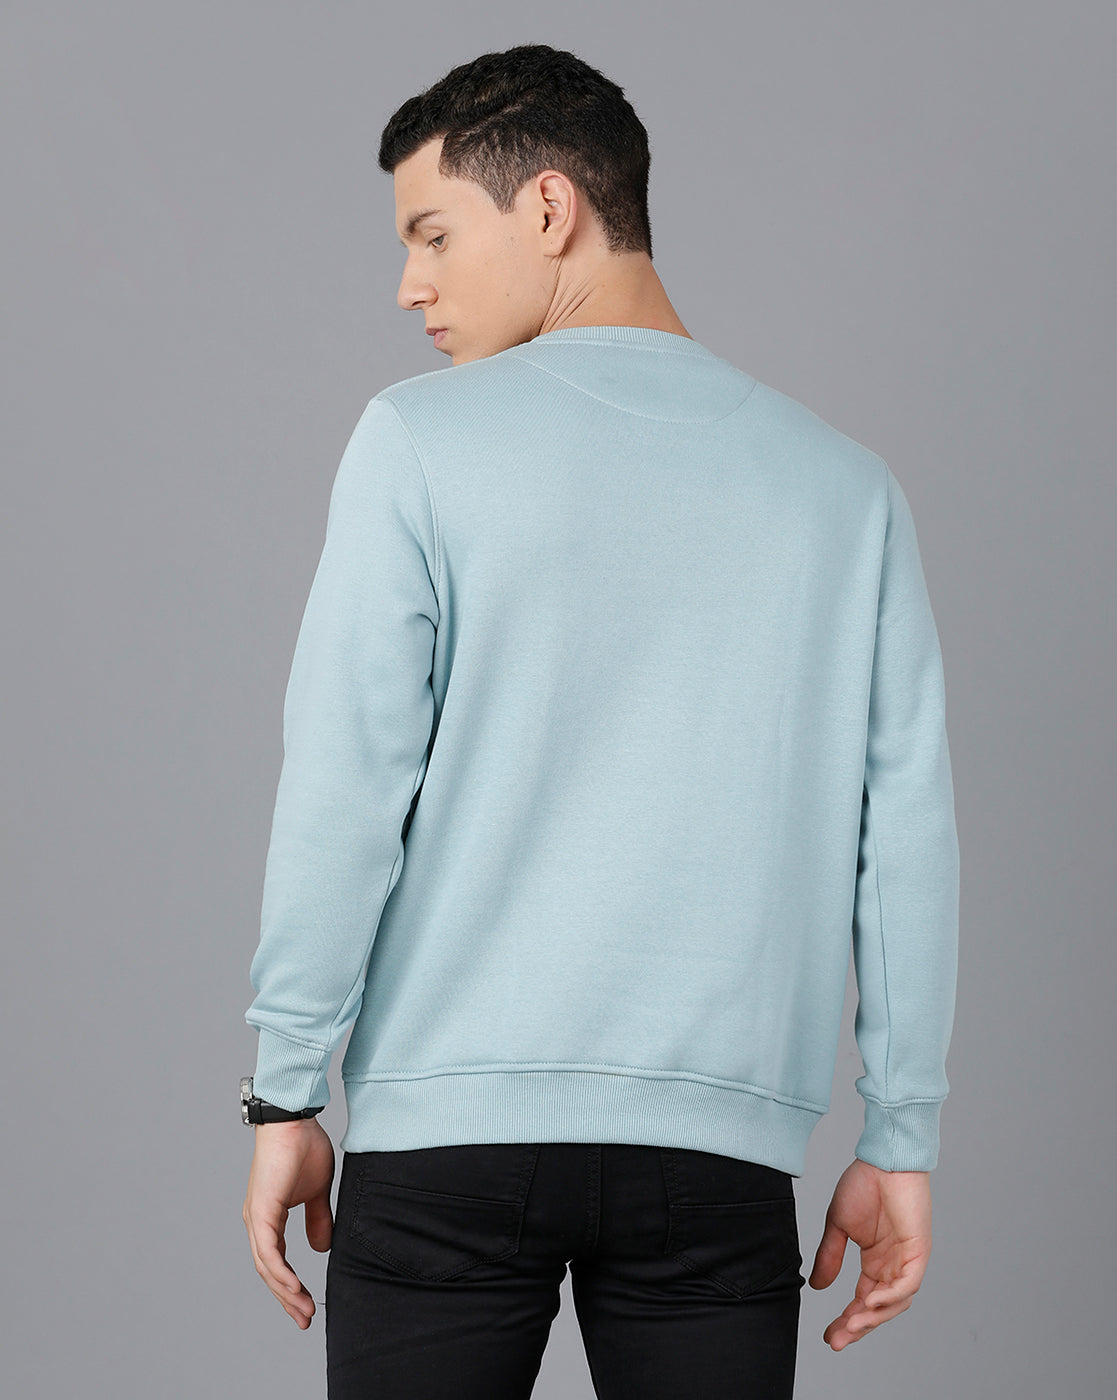 Classic Polo Mens Cotton Blend Full Sleeve Solid Slim Fit Sky Blue Color Round Neck Sweat Shirt | Cpss - 414 H